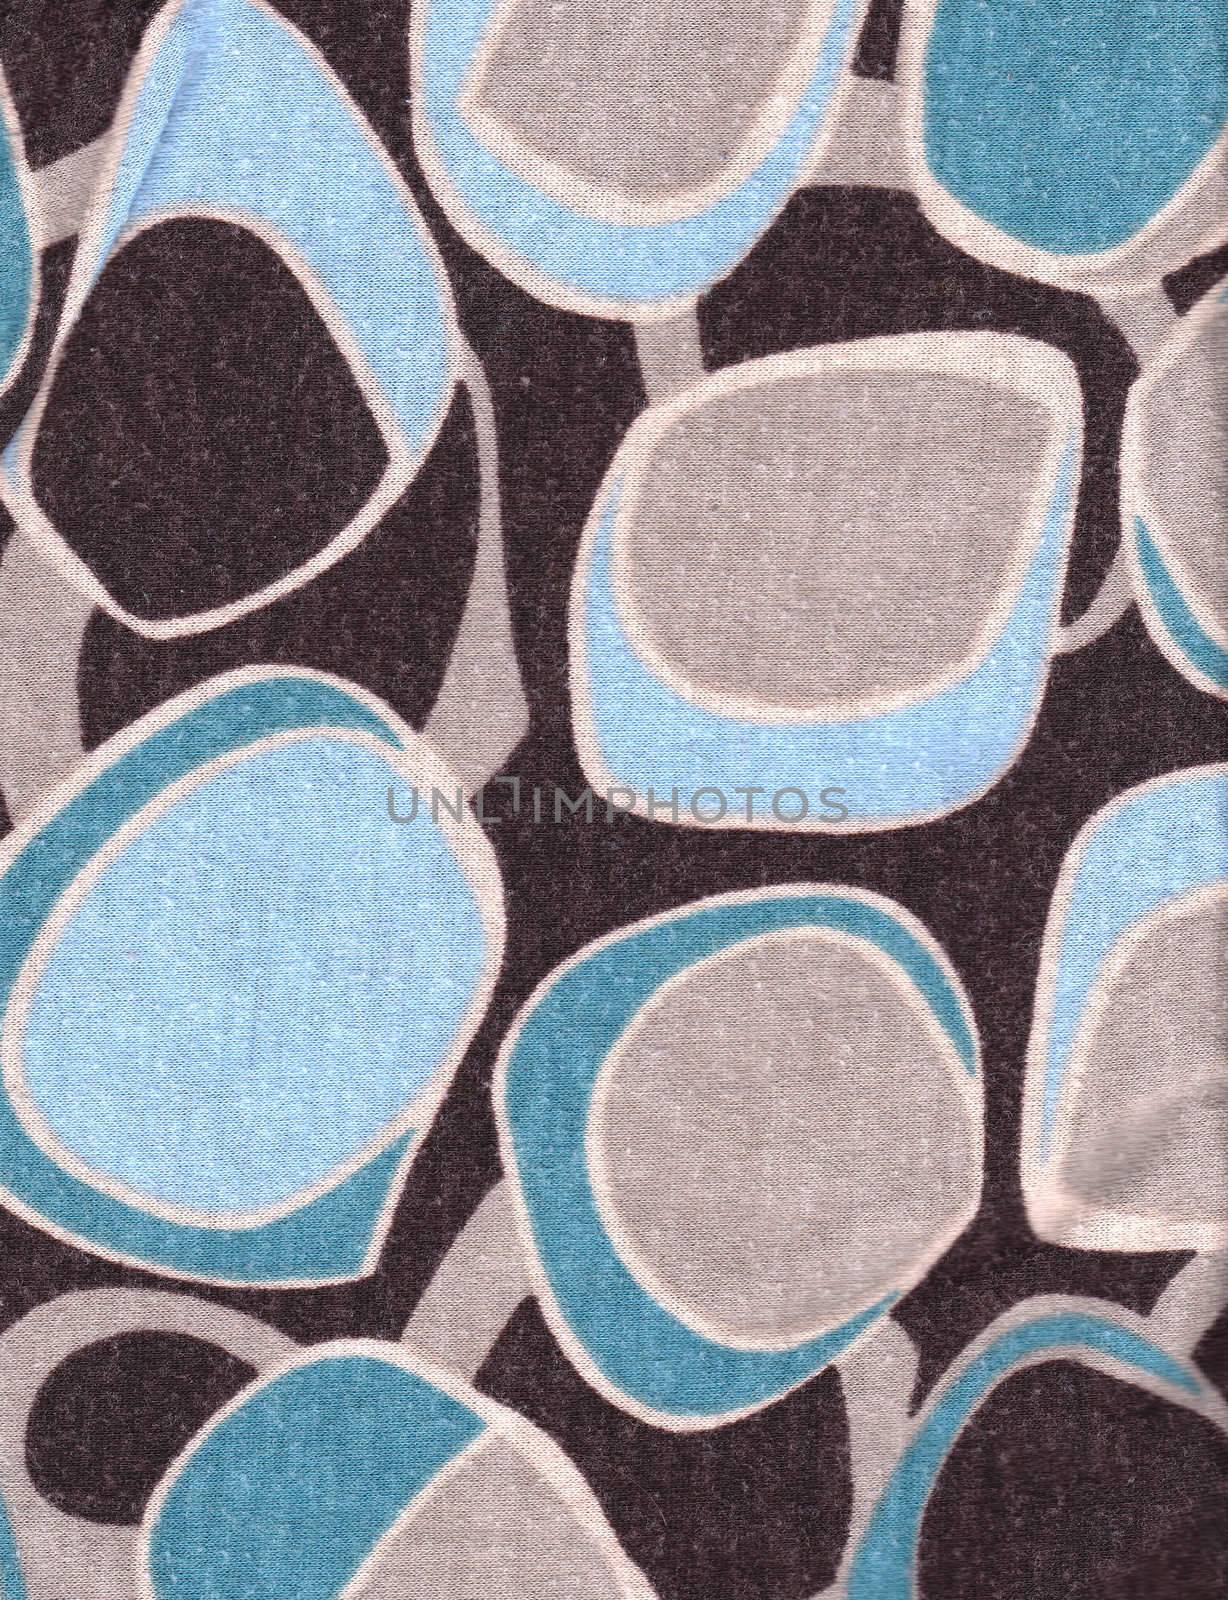 A round pattern fabric large abstract docorative scrapbook